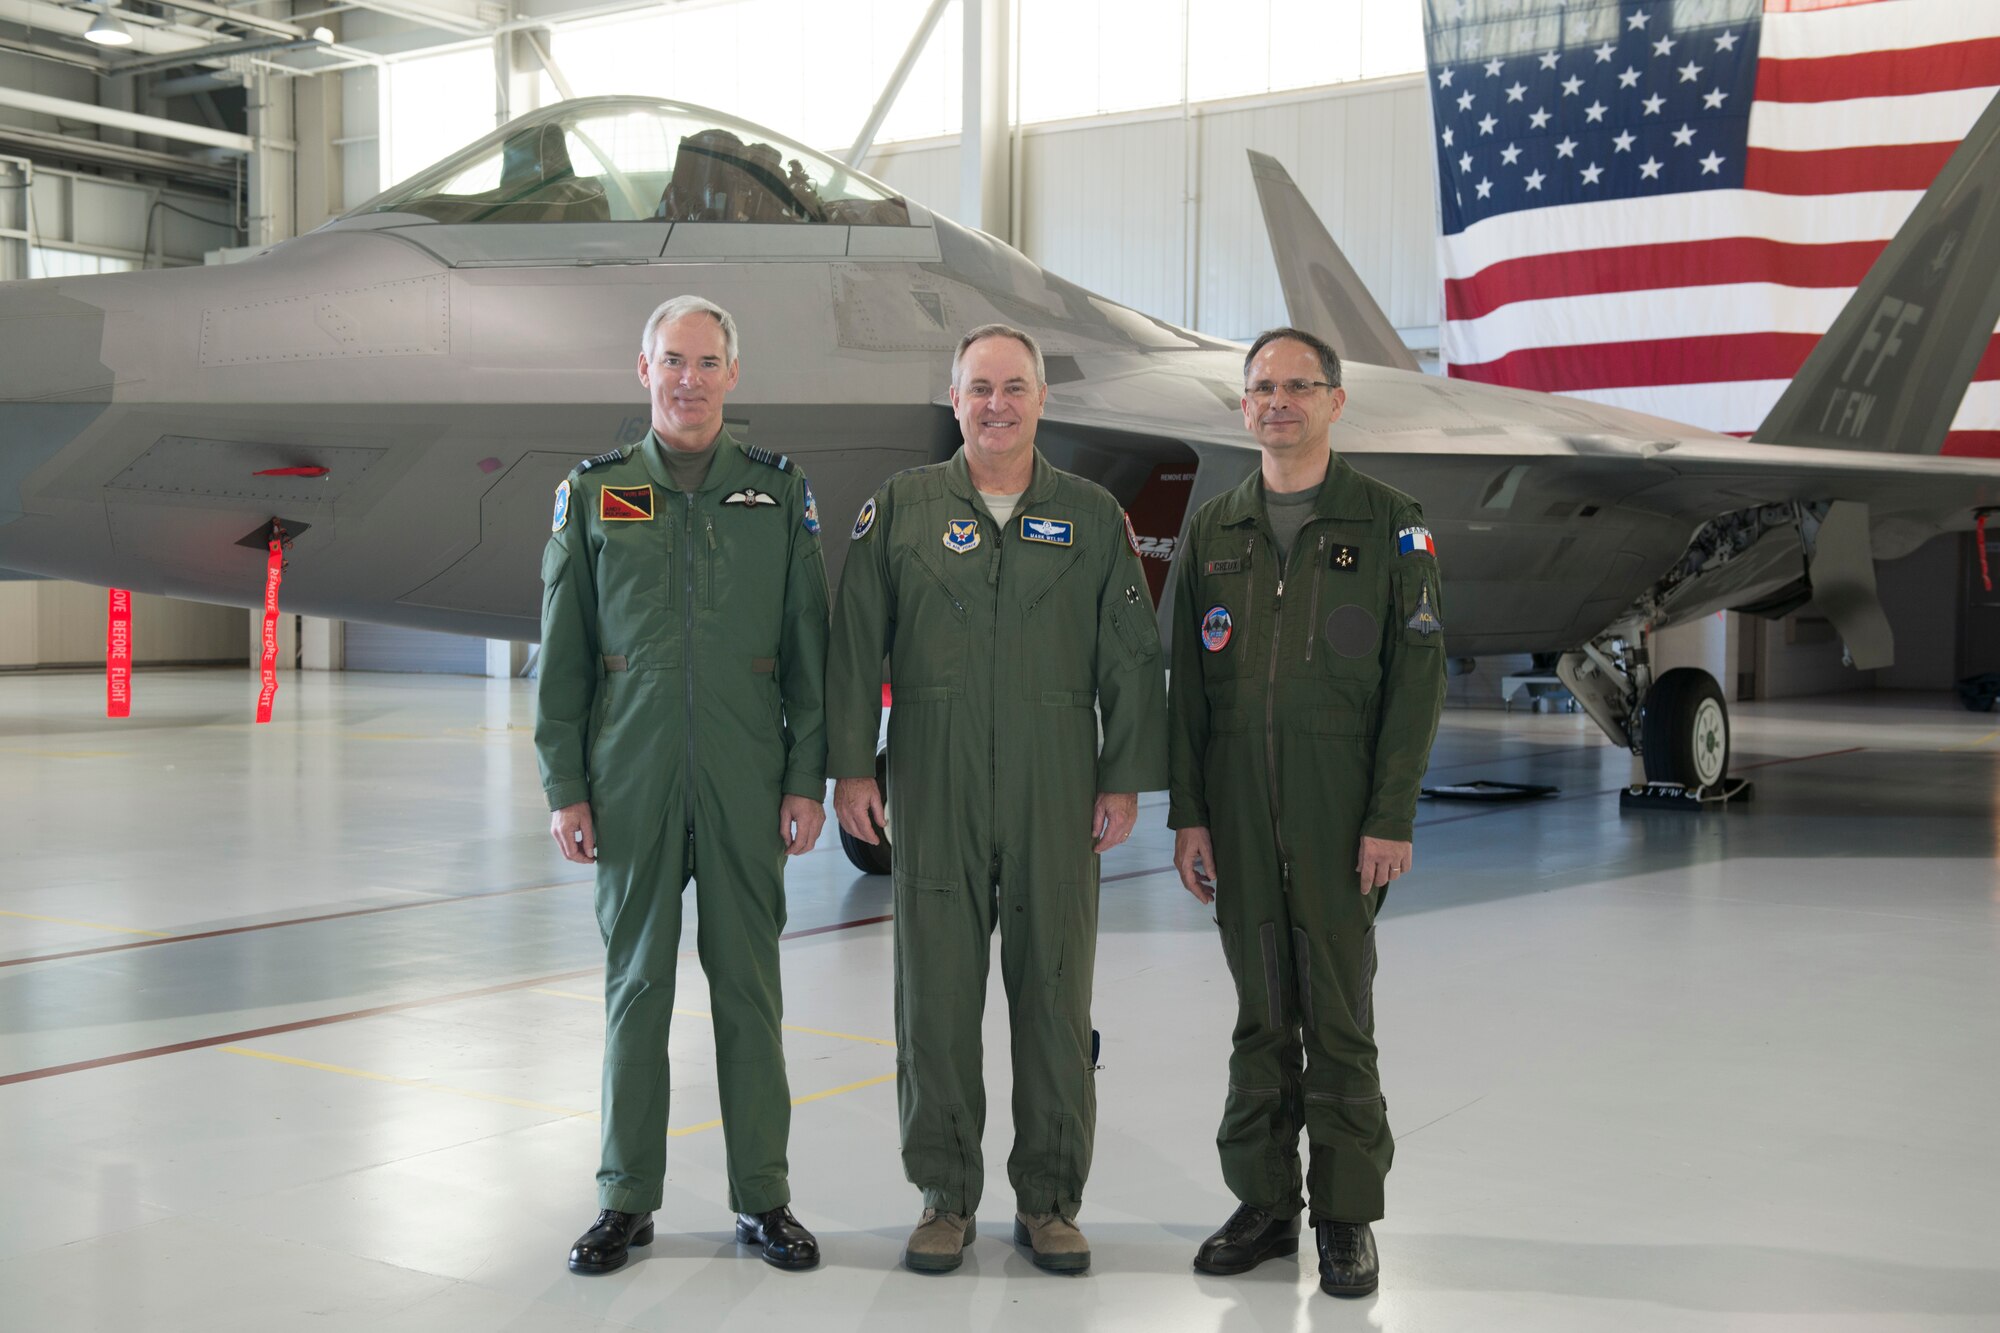 From left, British Royal Air Force Chief of the Air Staff, Air Chief Marshall Sir Andrew Pulford, Chief of Staff of the U.S. Air Force Gen. Mark A. Welsh III, French air force Deputy Chief of the Air Staff Gen. Antoine Creux pose for a photo during the Trilateral Exercise at Langley Air Force Base, Va., Dec. 15, 2015.  As part of the exercise, Pulford, Welsh, and Creux hosted a press conference to discuss the importance of working together as coalition forces.  (U.S. Air Force photo by Tech. Sgt. Katie Gar Ward)